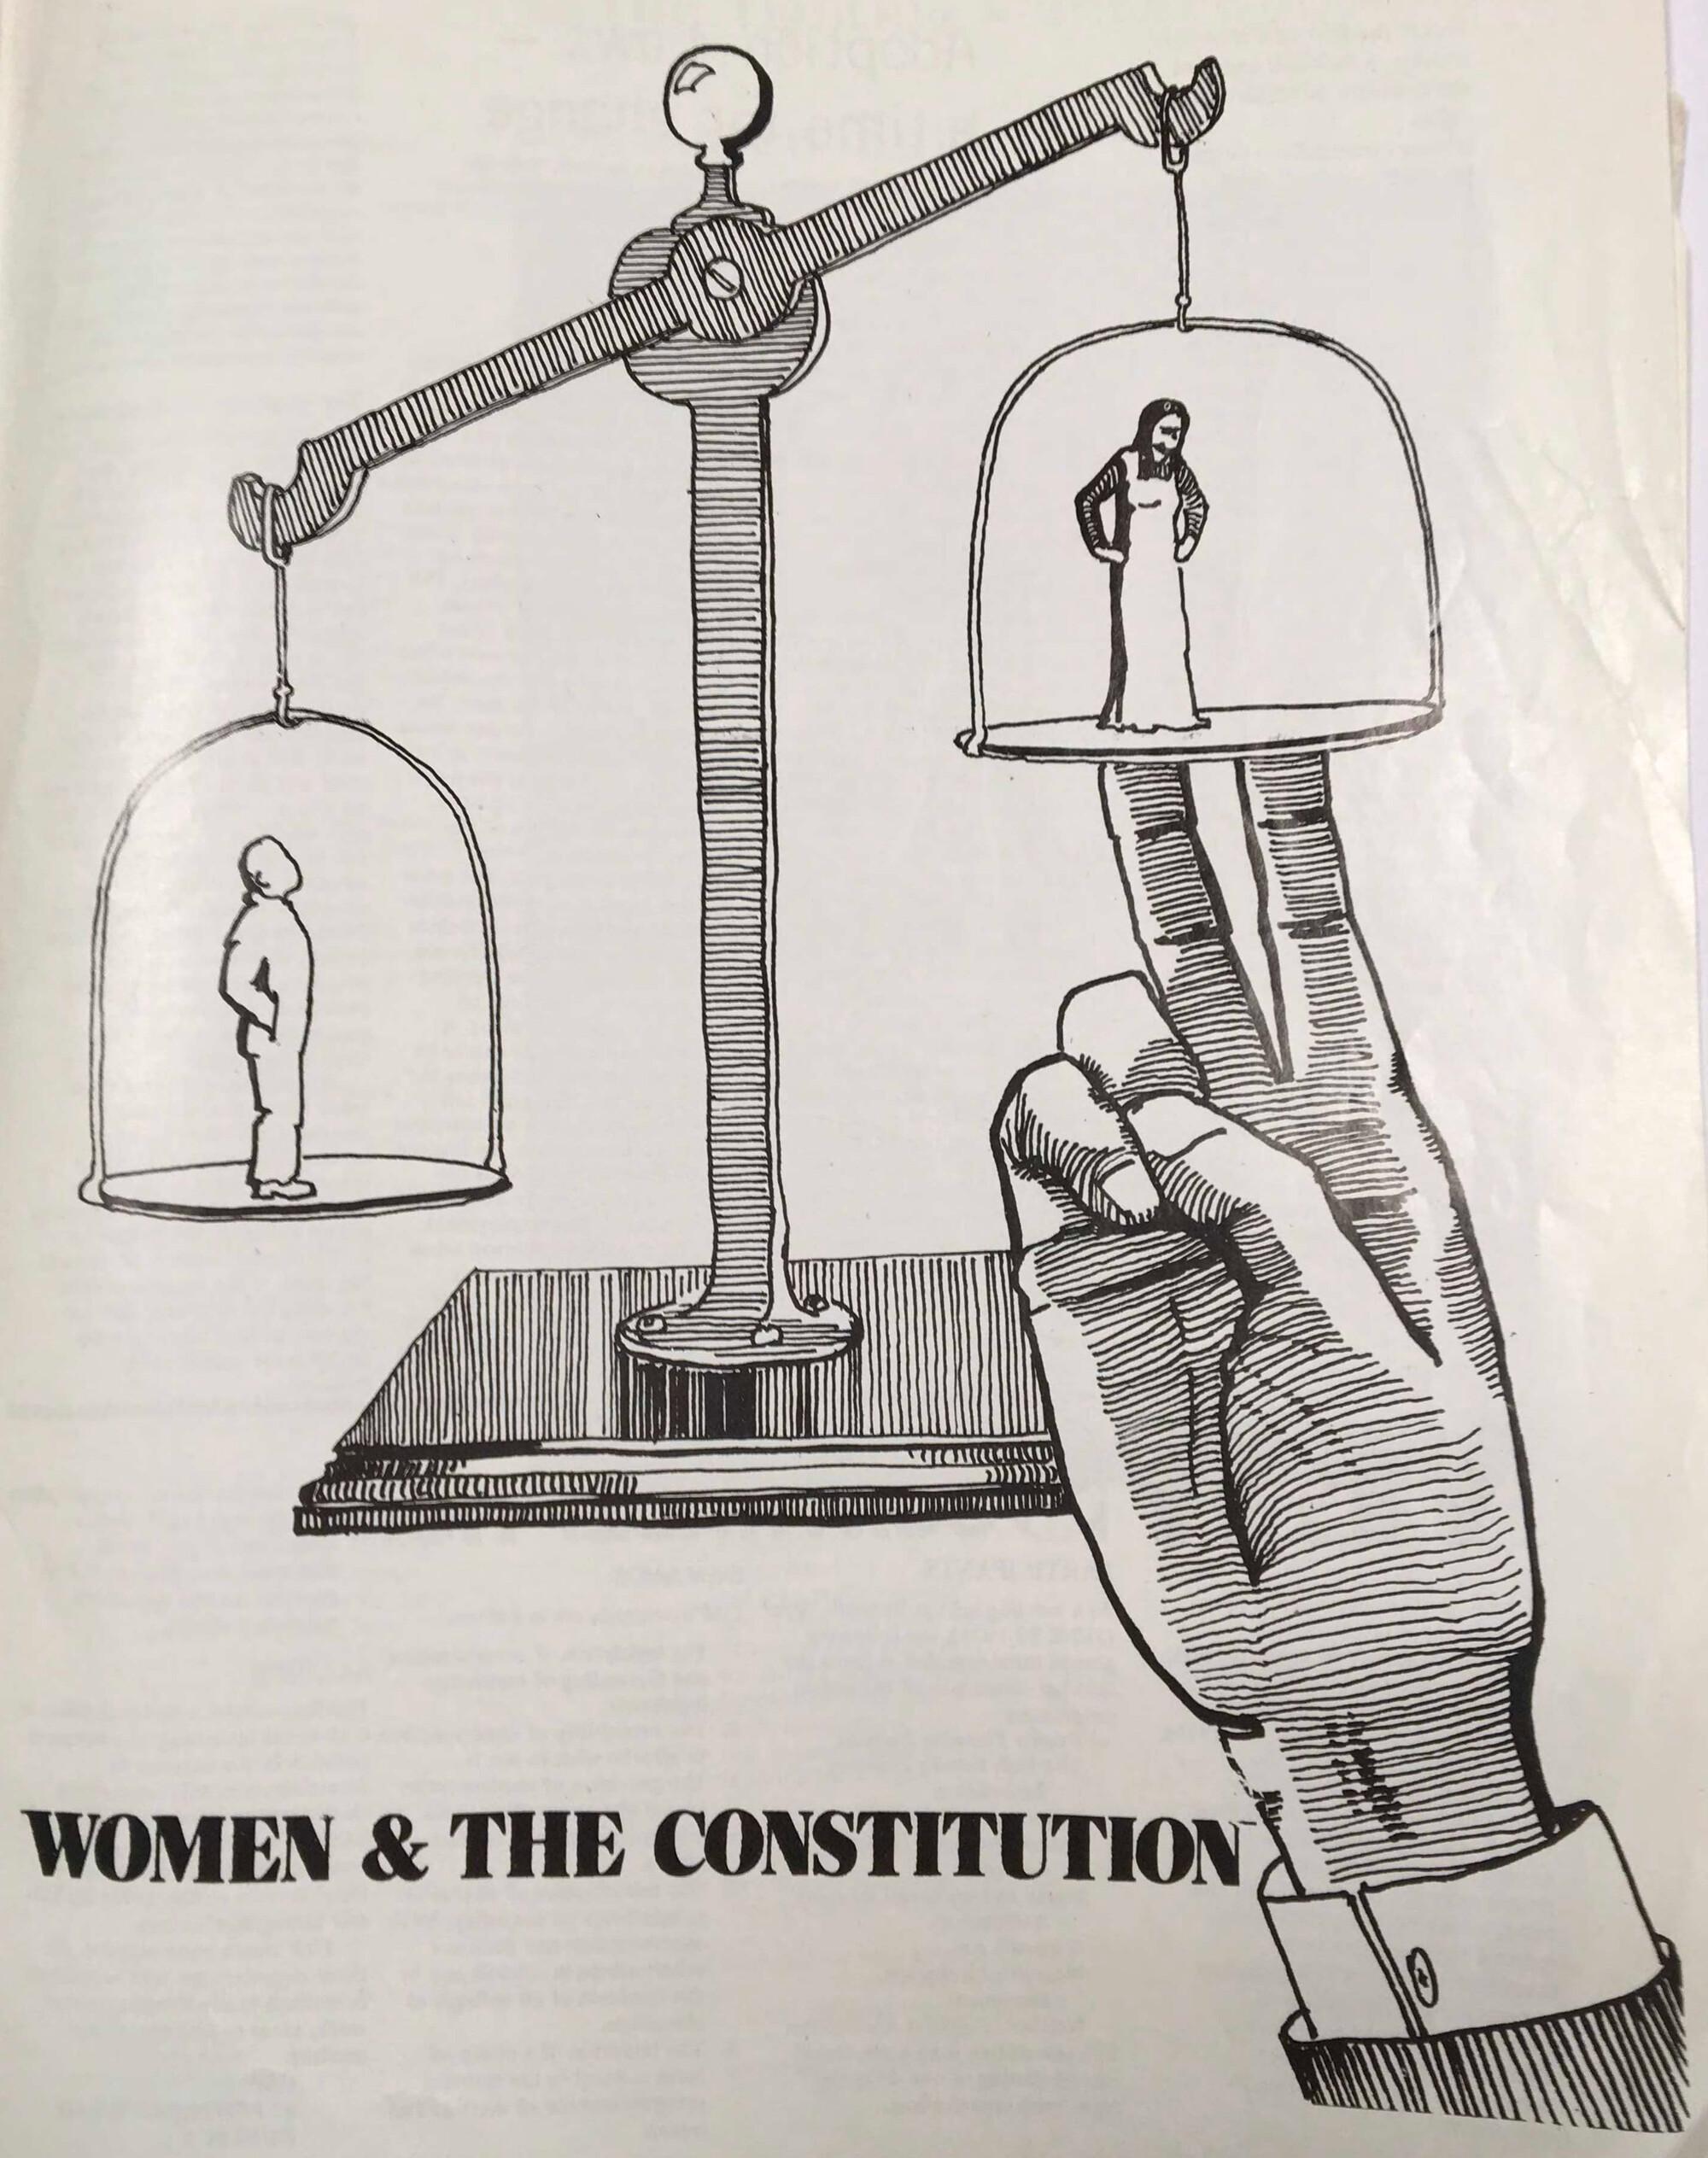 An illustration of a balance scales with a man on one side and a woman on the other. A large hand is pushing the woman upwards to skew the balance. It is subtitled, "Women & The Constitution"